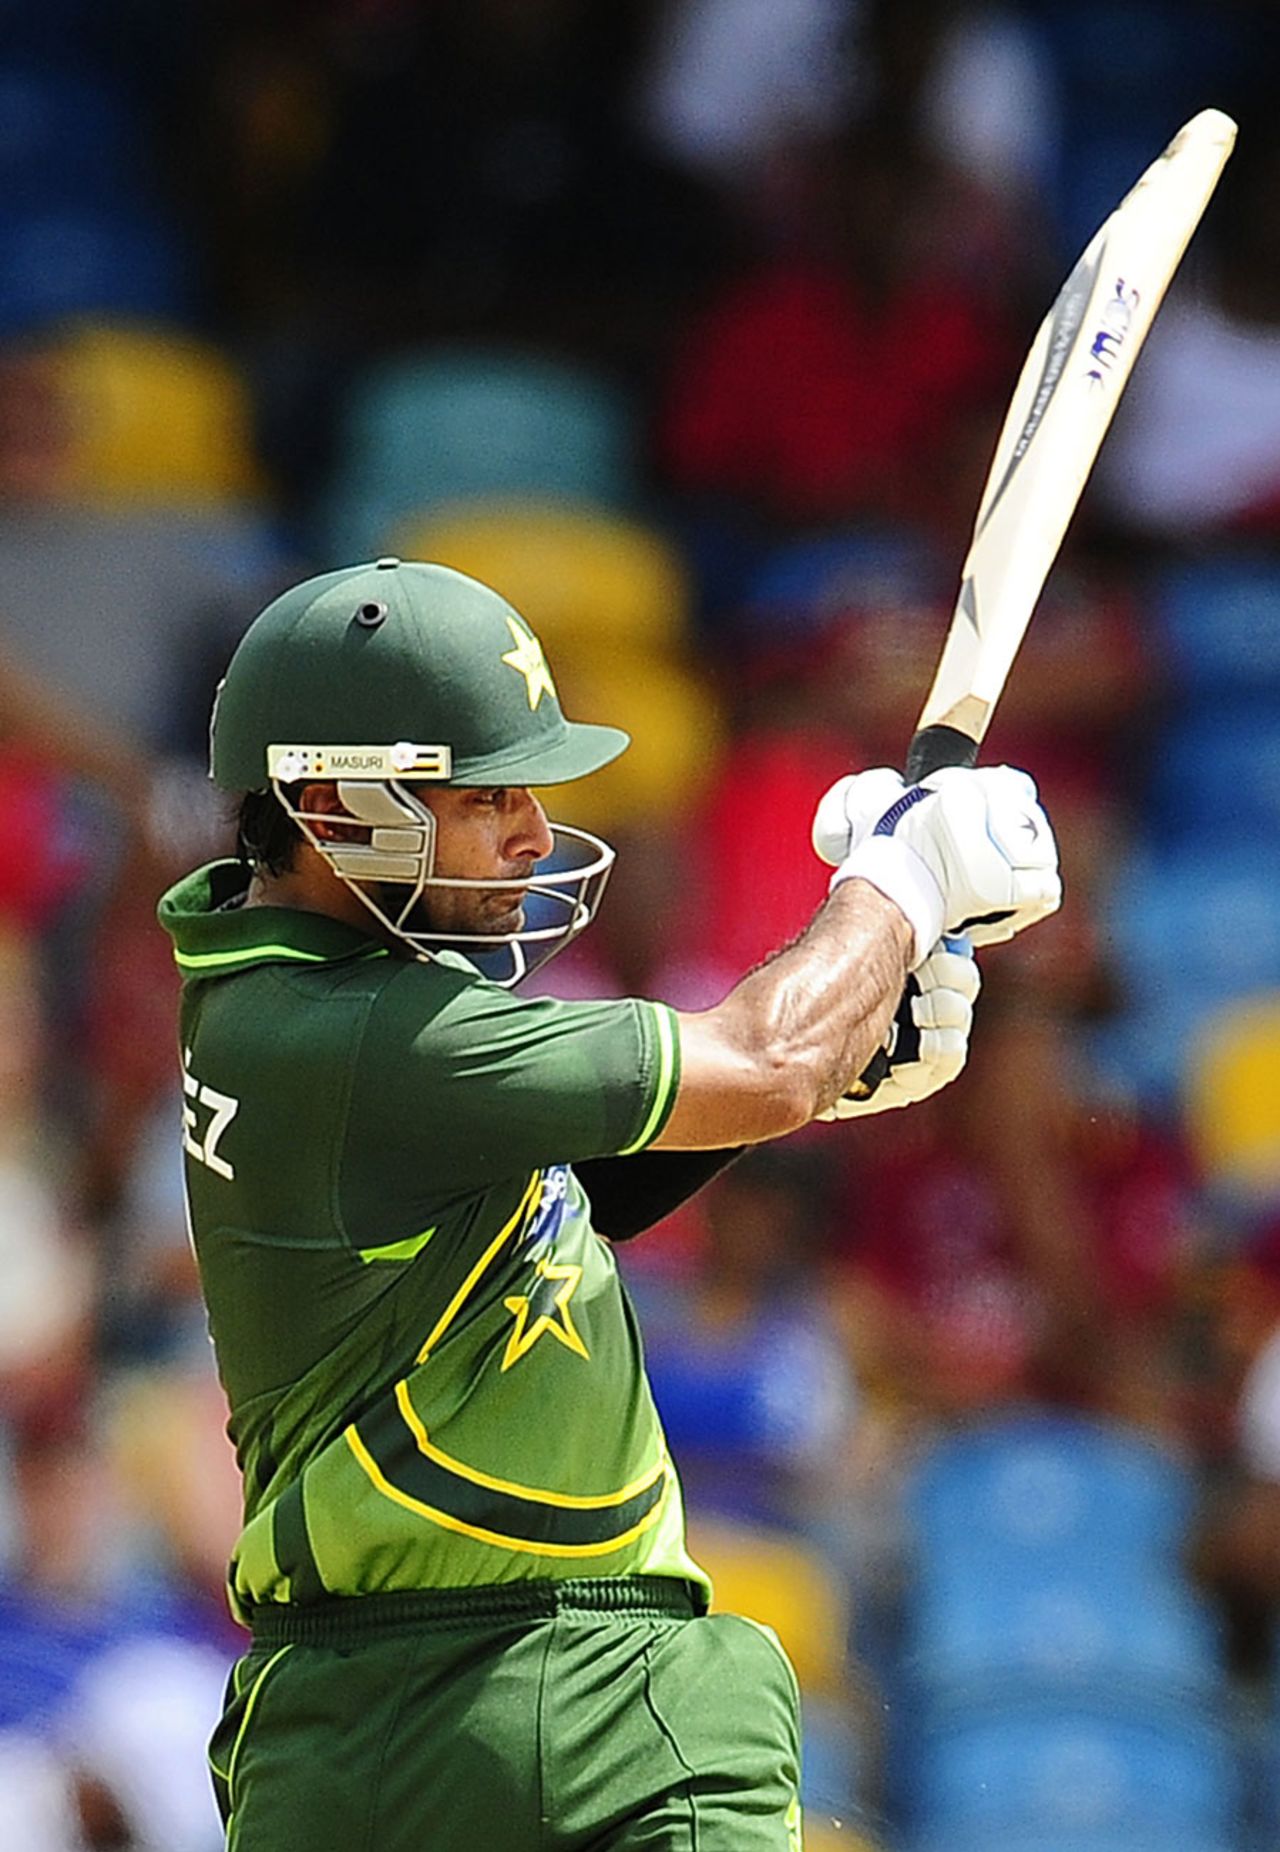 Mohammad Hafeez anchored the Pakistan innings, West Indies v Pakistan, 4th ODI, Barbados, May 2, 2011